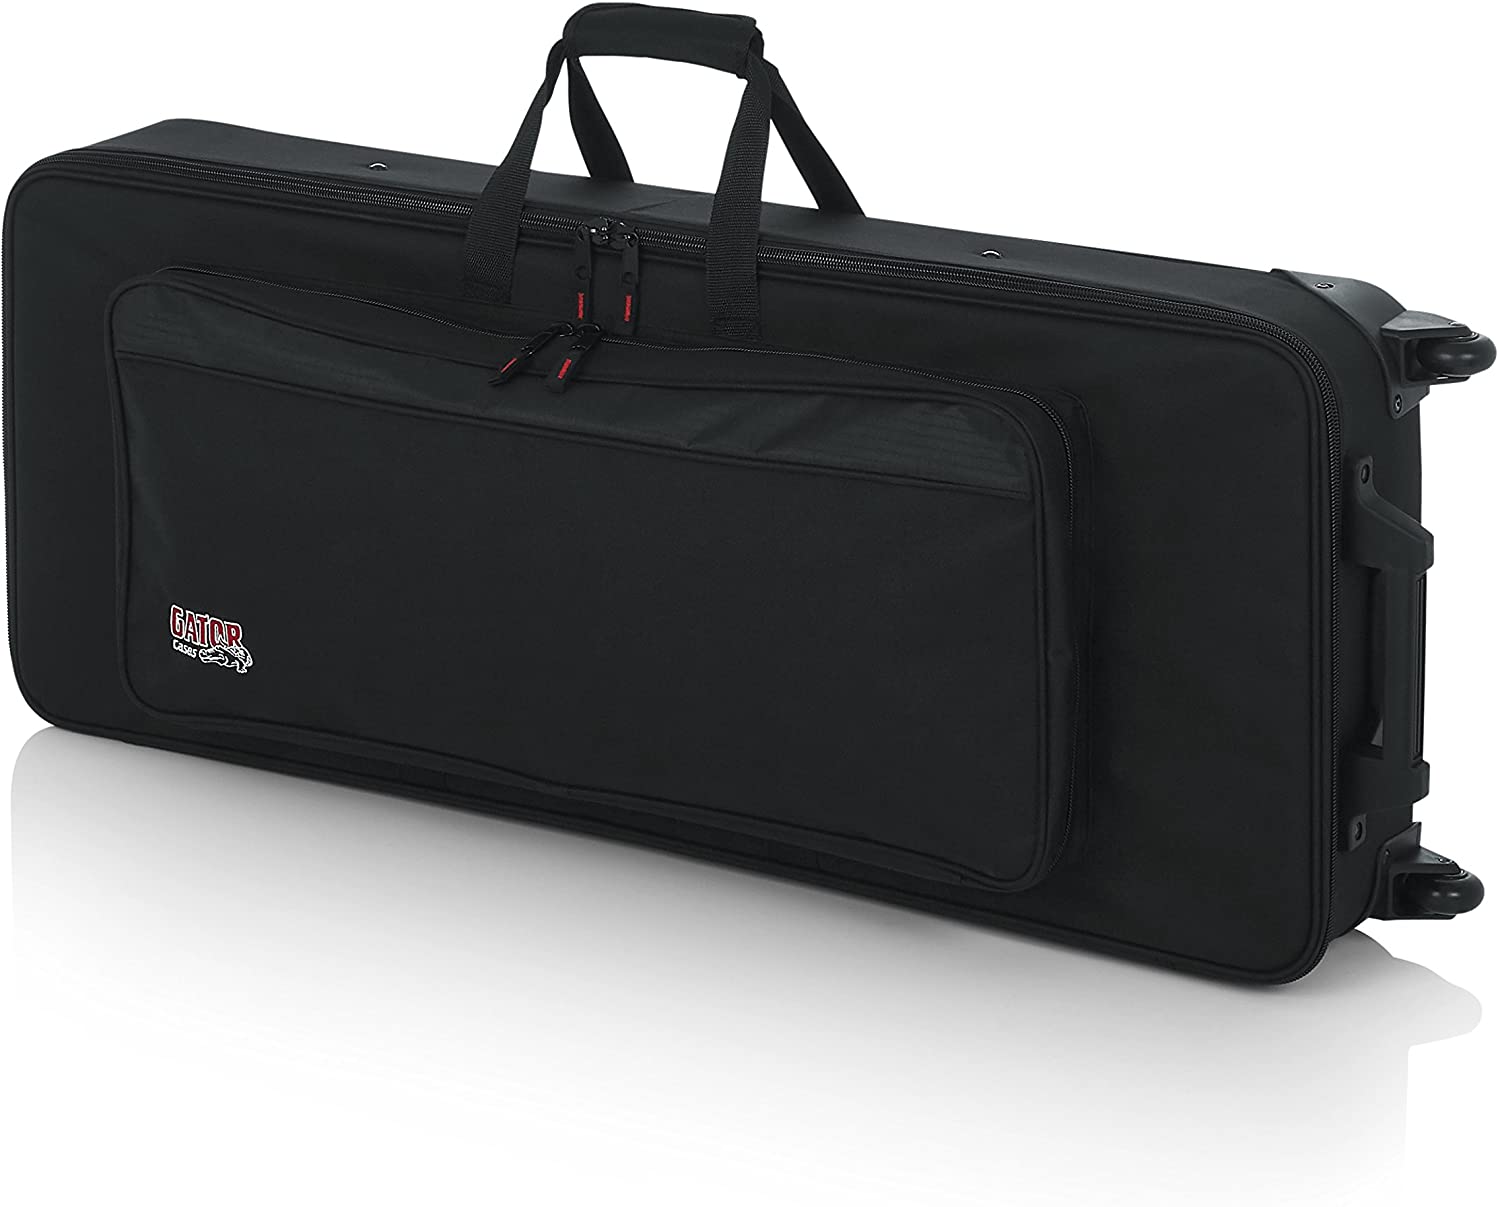 Gator Lightweight Case with Retractable Pull Handle and Wheels Fits Standard 49 Note Keyboards and Electric Pianos (GK-49) - Pro-Distributing